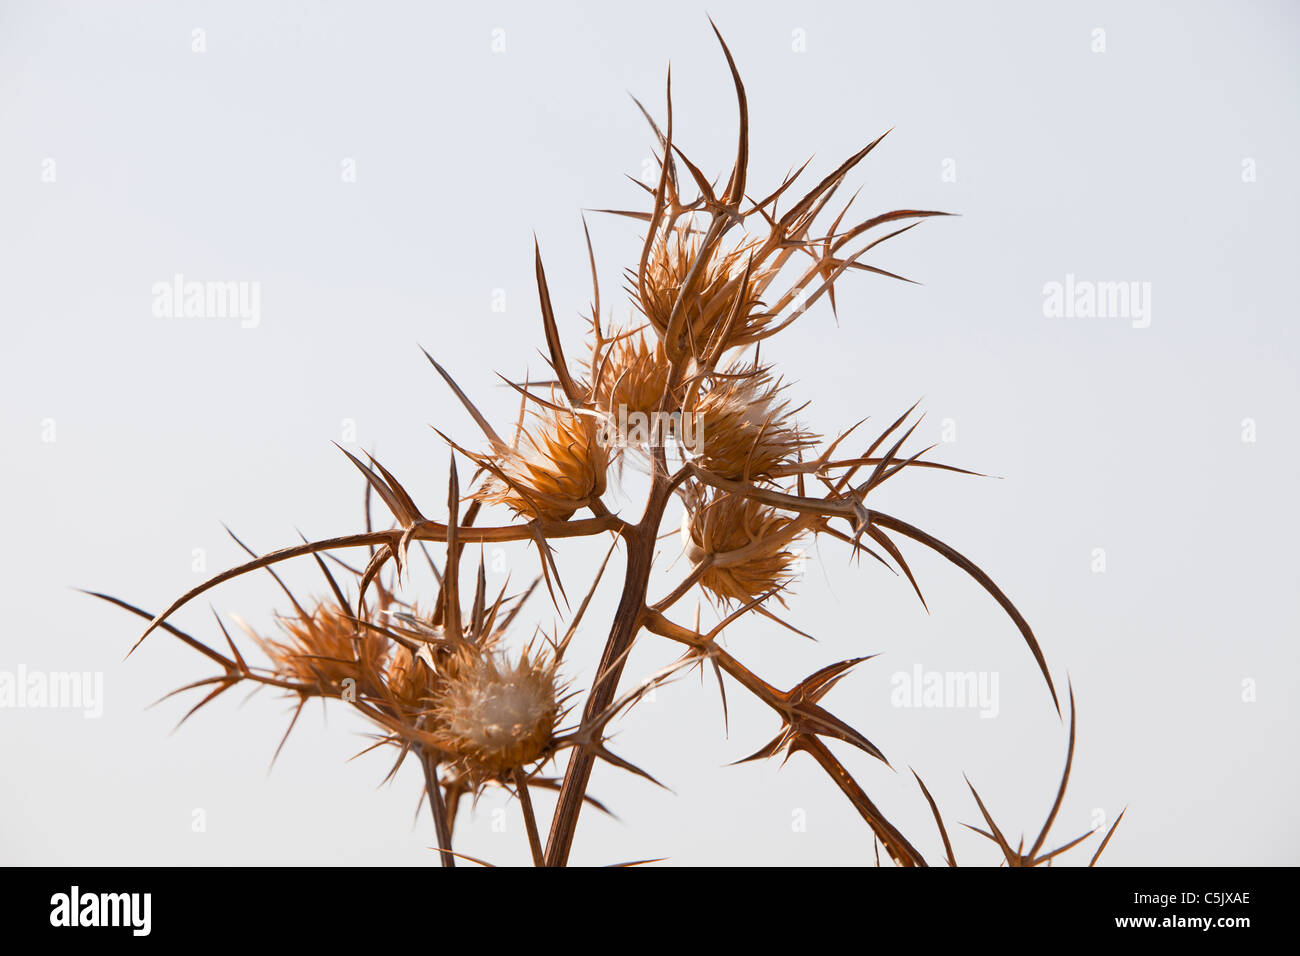 Dried thistle heads on Lesbos, Greece. Stock Photo